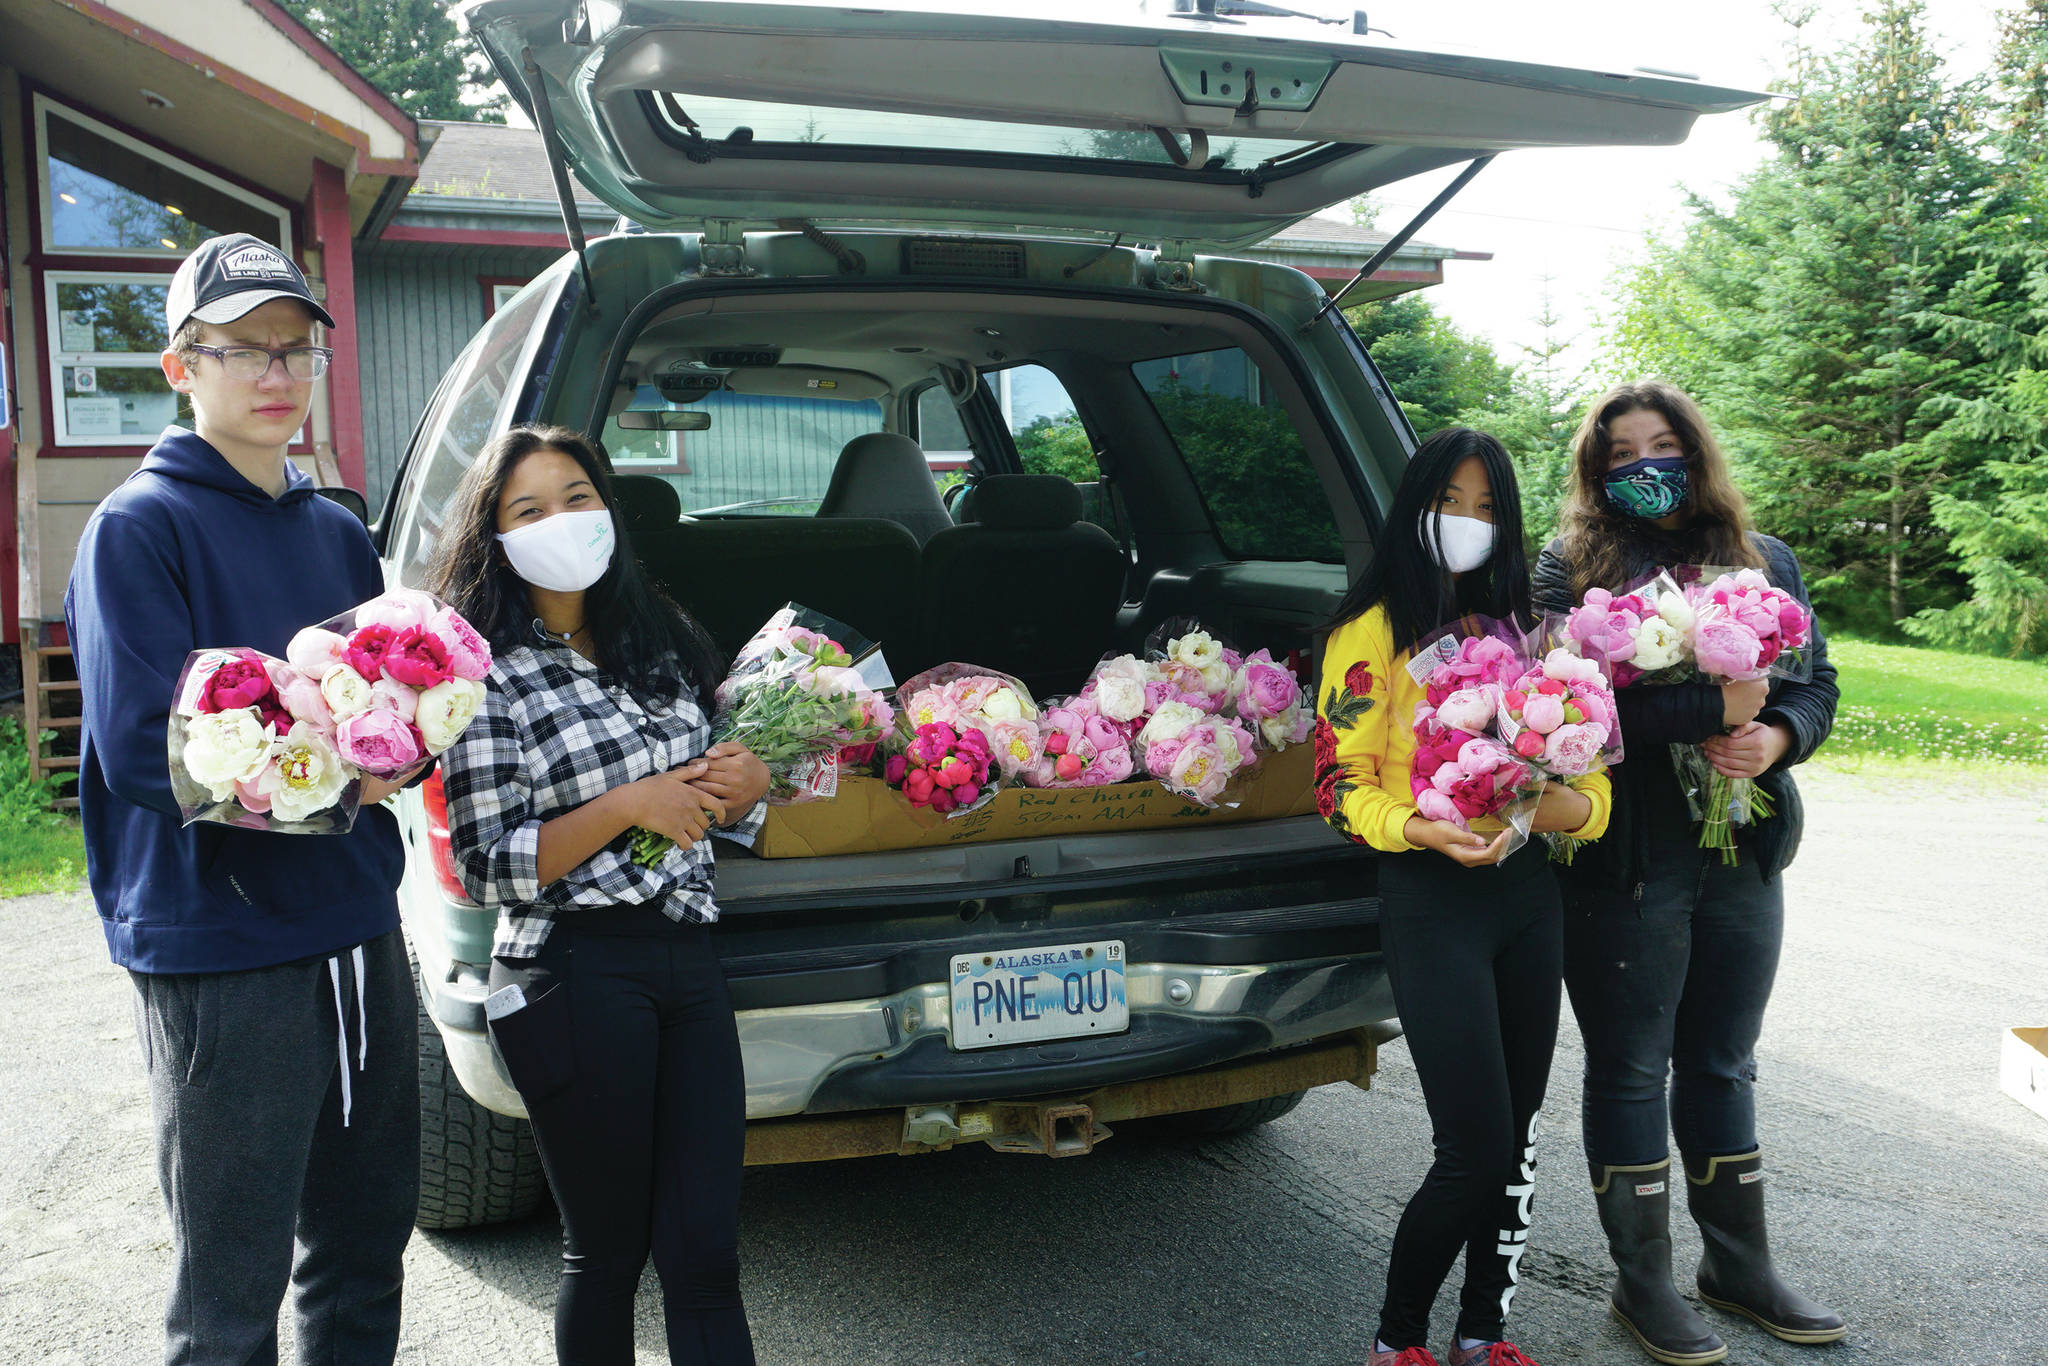 Homer High School students working on a service project hold some of the peonies they delivered on Tuesday, Aug. 4, 2020, to 150 Homer, Alaska, area businesses, nonprofits and institutions — organizations with frontline employees working during the COVID-19 pandemic. Places receiving peonies included South Peninsula Hospital, Long Term Care, the Homer Senior Center and South Peninsula Haven House. The peonies were donated by Alaska Perfect Peonies by owner Rita Jo Shoultz and were left over from this year’s crop of the decorative flower. From left to right are Gideon McGhee, Angelia McGhee, Sameah McGhee and Lucinda Maryott. (Photo by Michael Armstrong/Homer News)